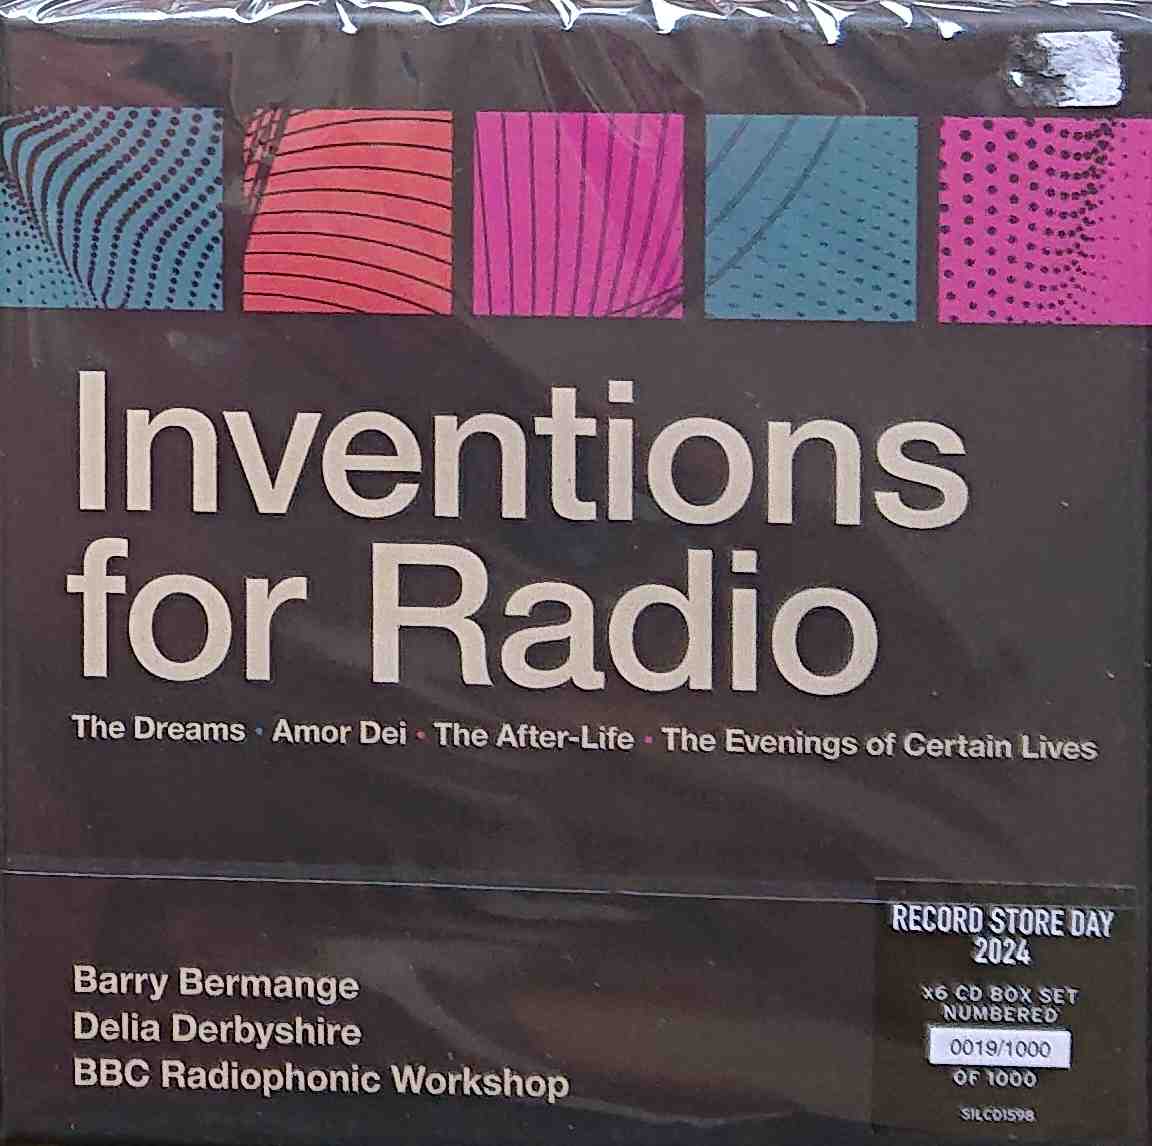 Picture of Inventions for radio - Record Store Day 2024 by artist Barry Bermange / Delia Derbyshire / BBC Radiophonic Workshop from the BBC cds - Records and Tapes library